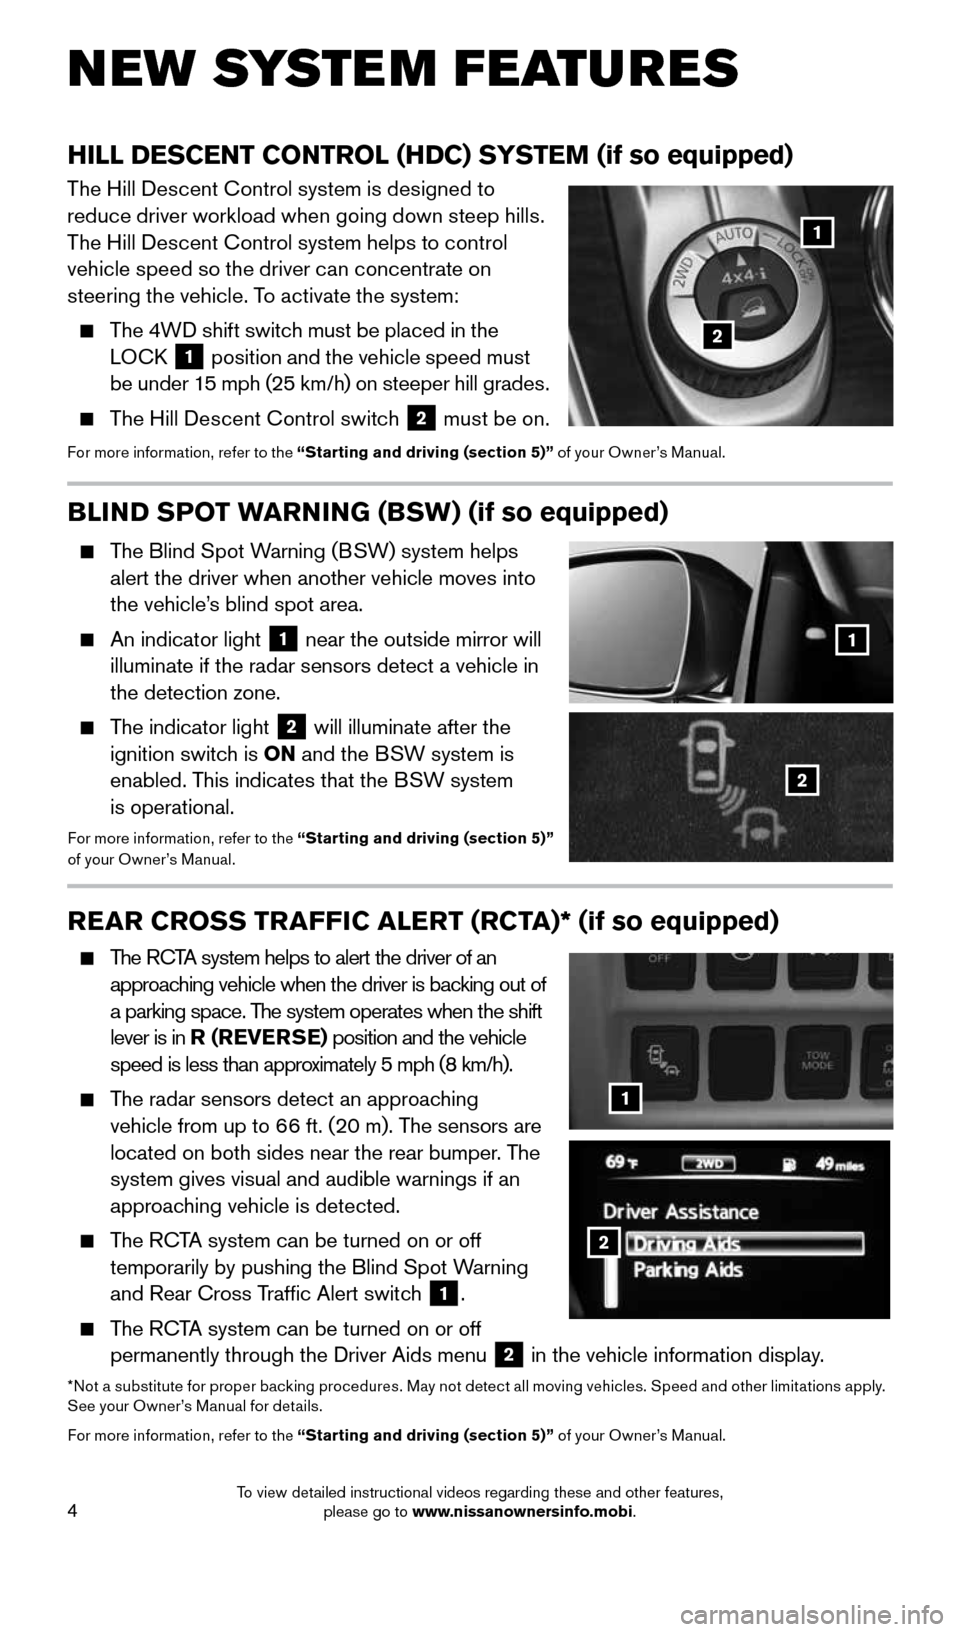 NISSAN PATHFINDER 2015 R52 / 4.G Quick Reference Guide 4
NEW SYSTEM FEATURES
BLIND SPOT WARNING (BSW) (if so equipped)
    The  Blind Spot Warning (BSW) system helps alert the driver when another vehicle moves into 
the vehicle’s blind spot area. 
 
   